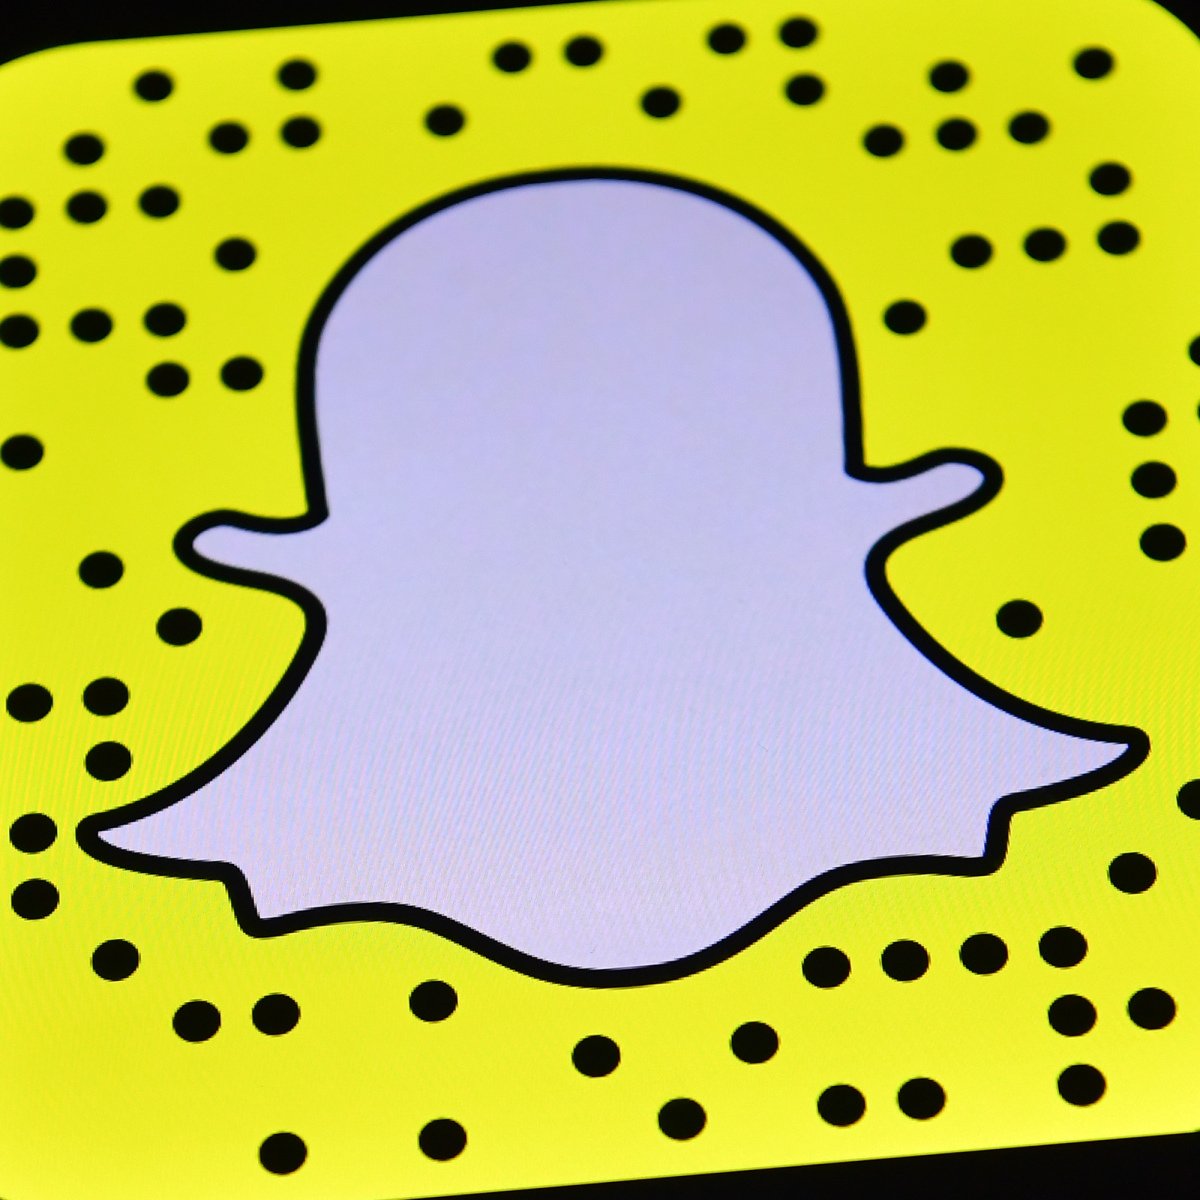 chad tuller add snapchat account for nudes photo